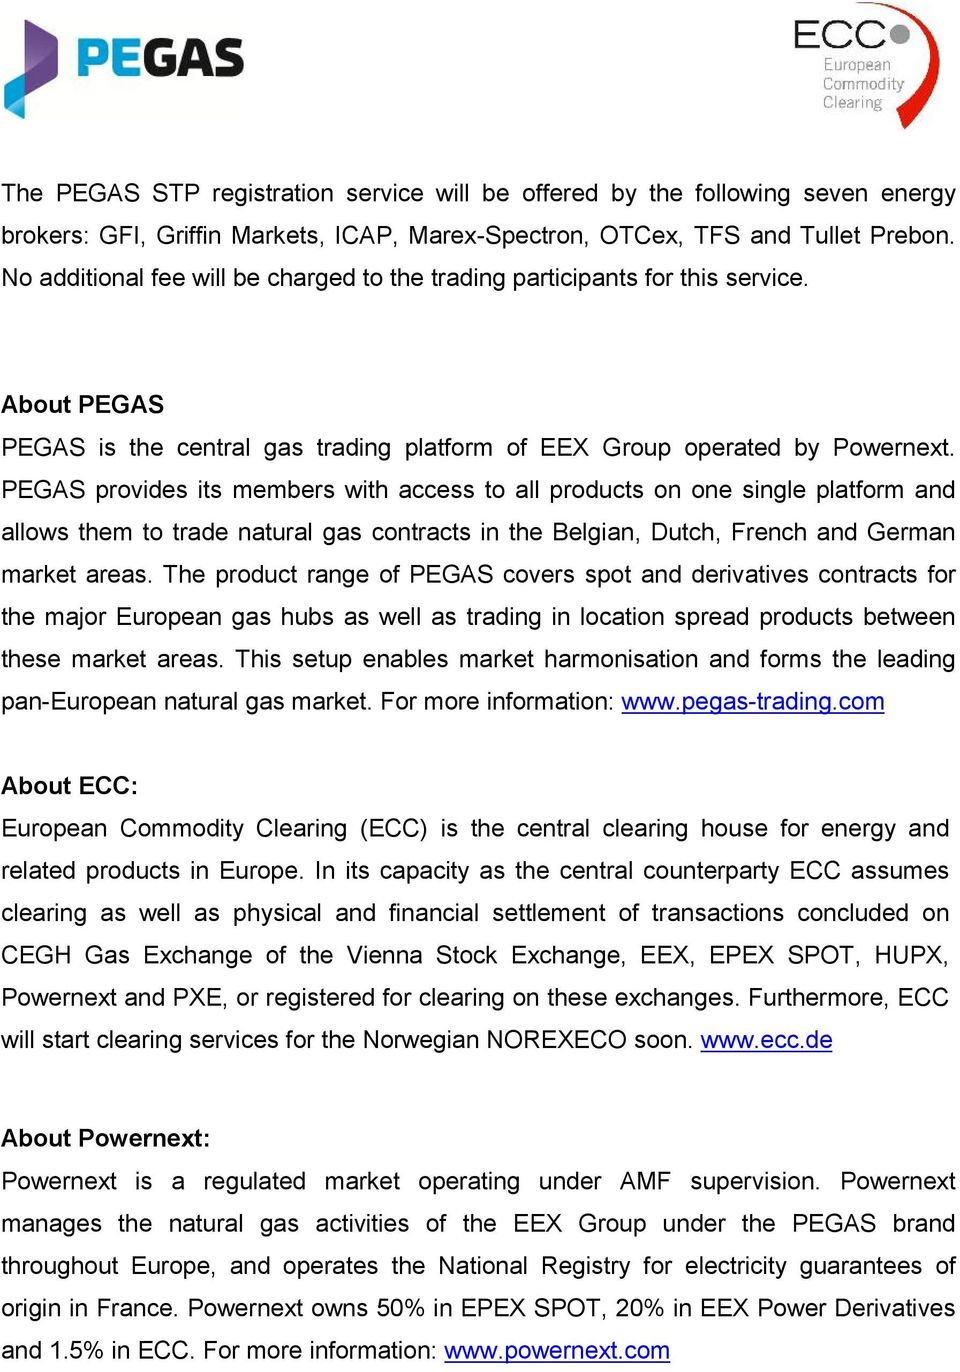 PEGAS provides its members with access to all products on one single platform and allows them to trade natural gas contracts in the Belgian, Dutch, French and German market areas.